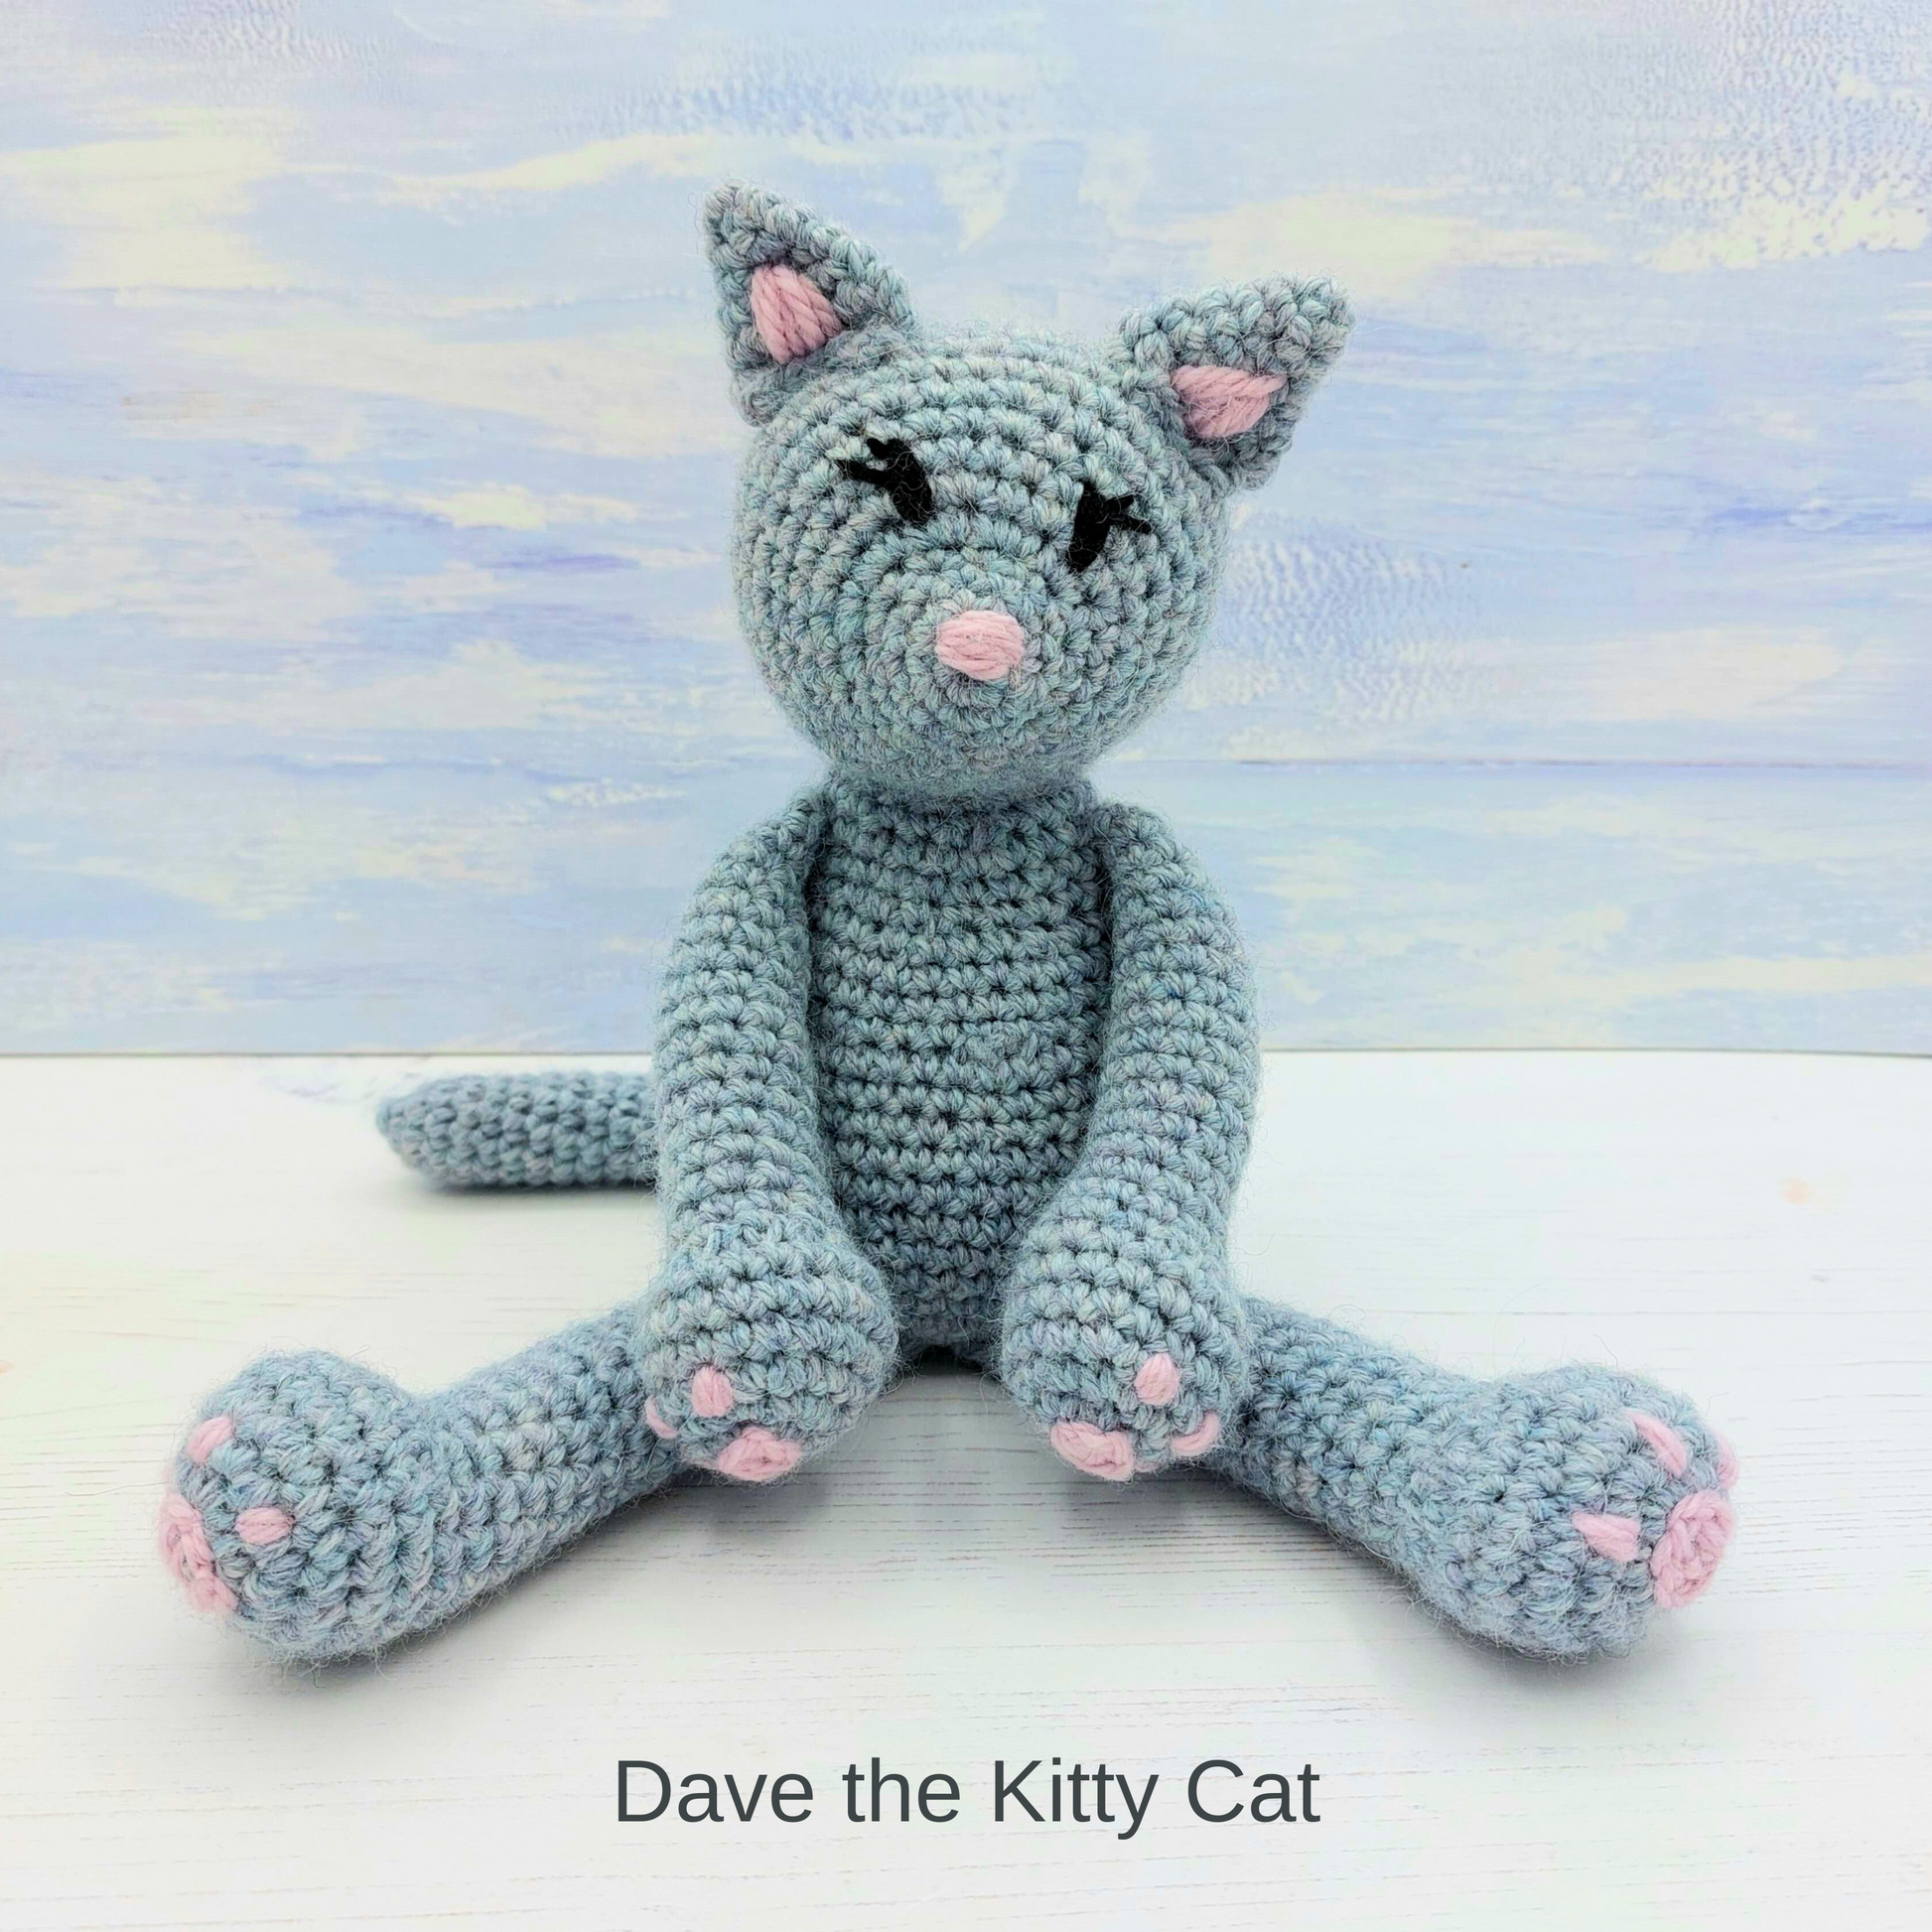 Dave the Kitty Cat